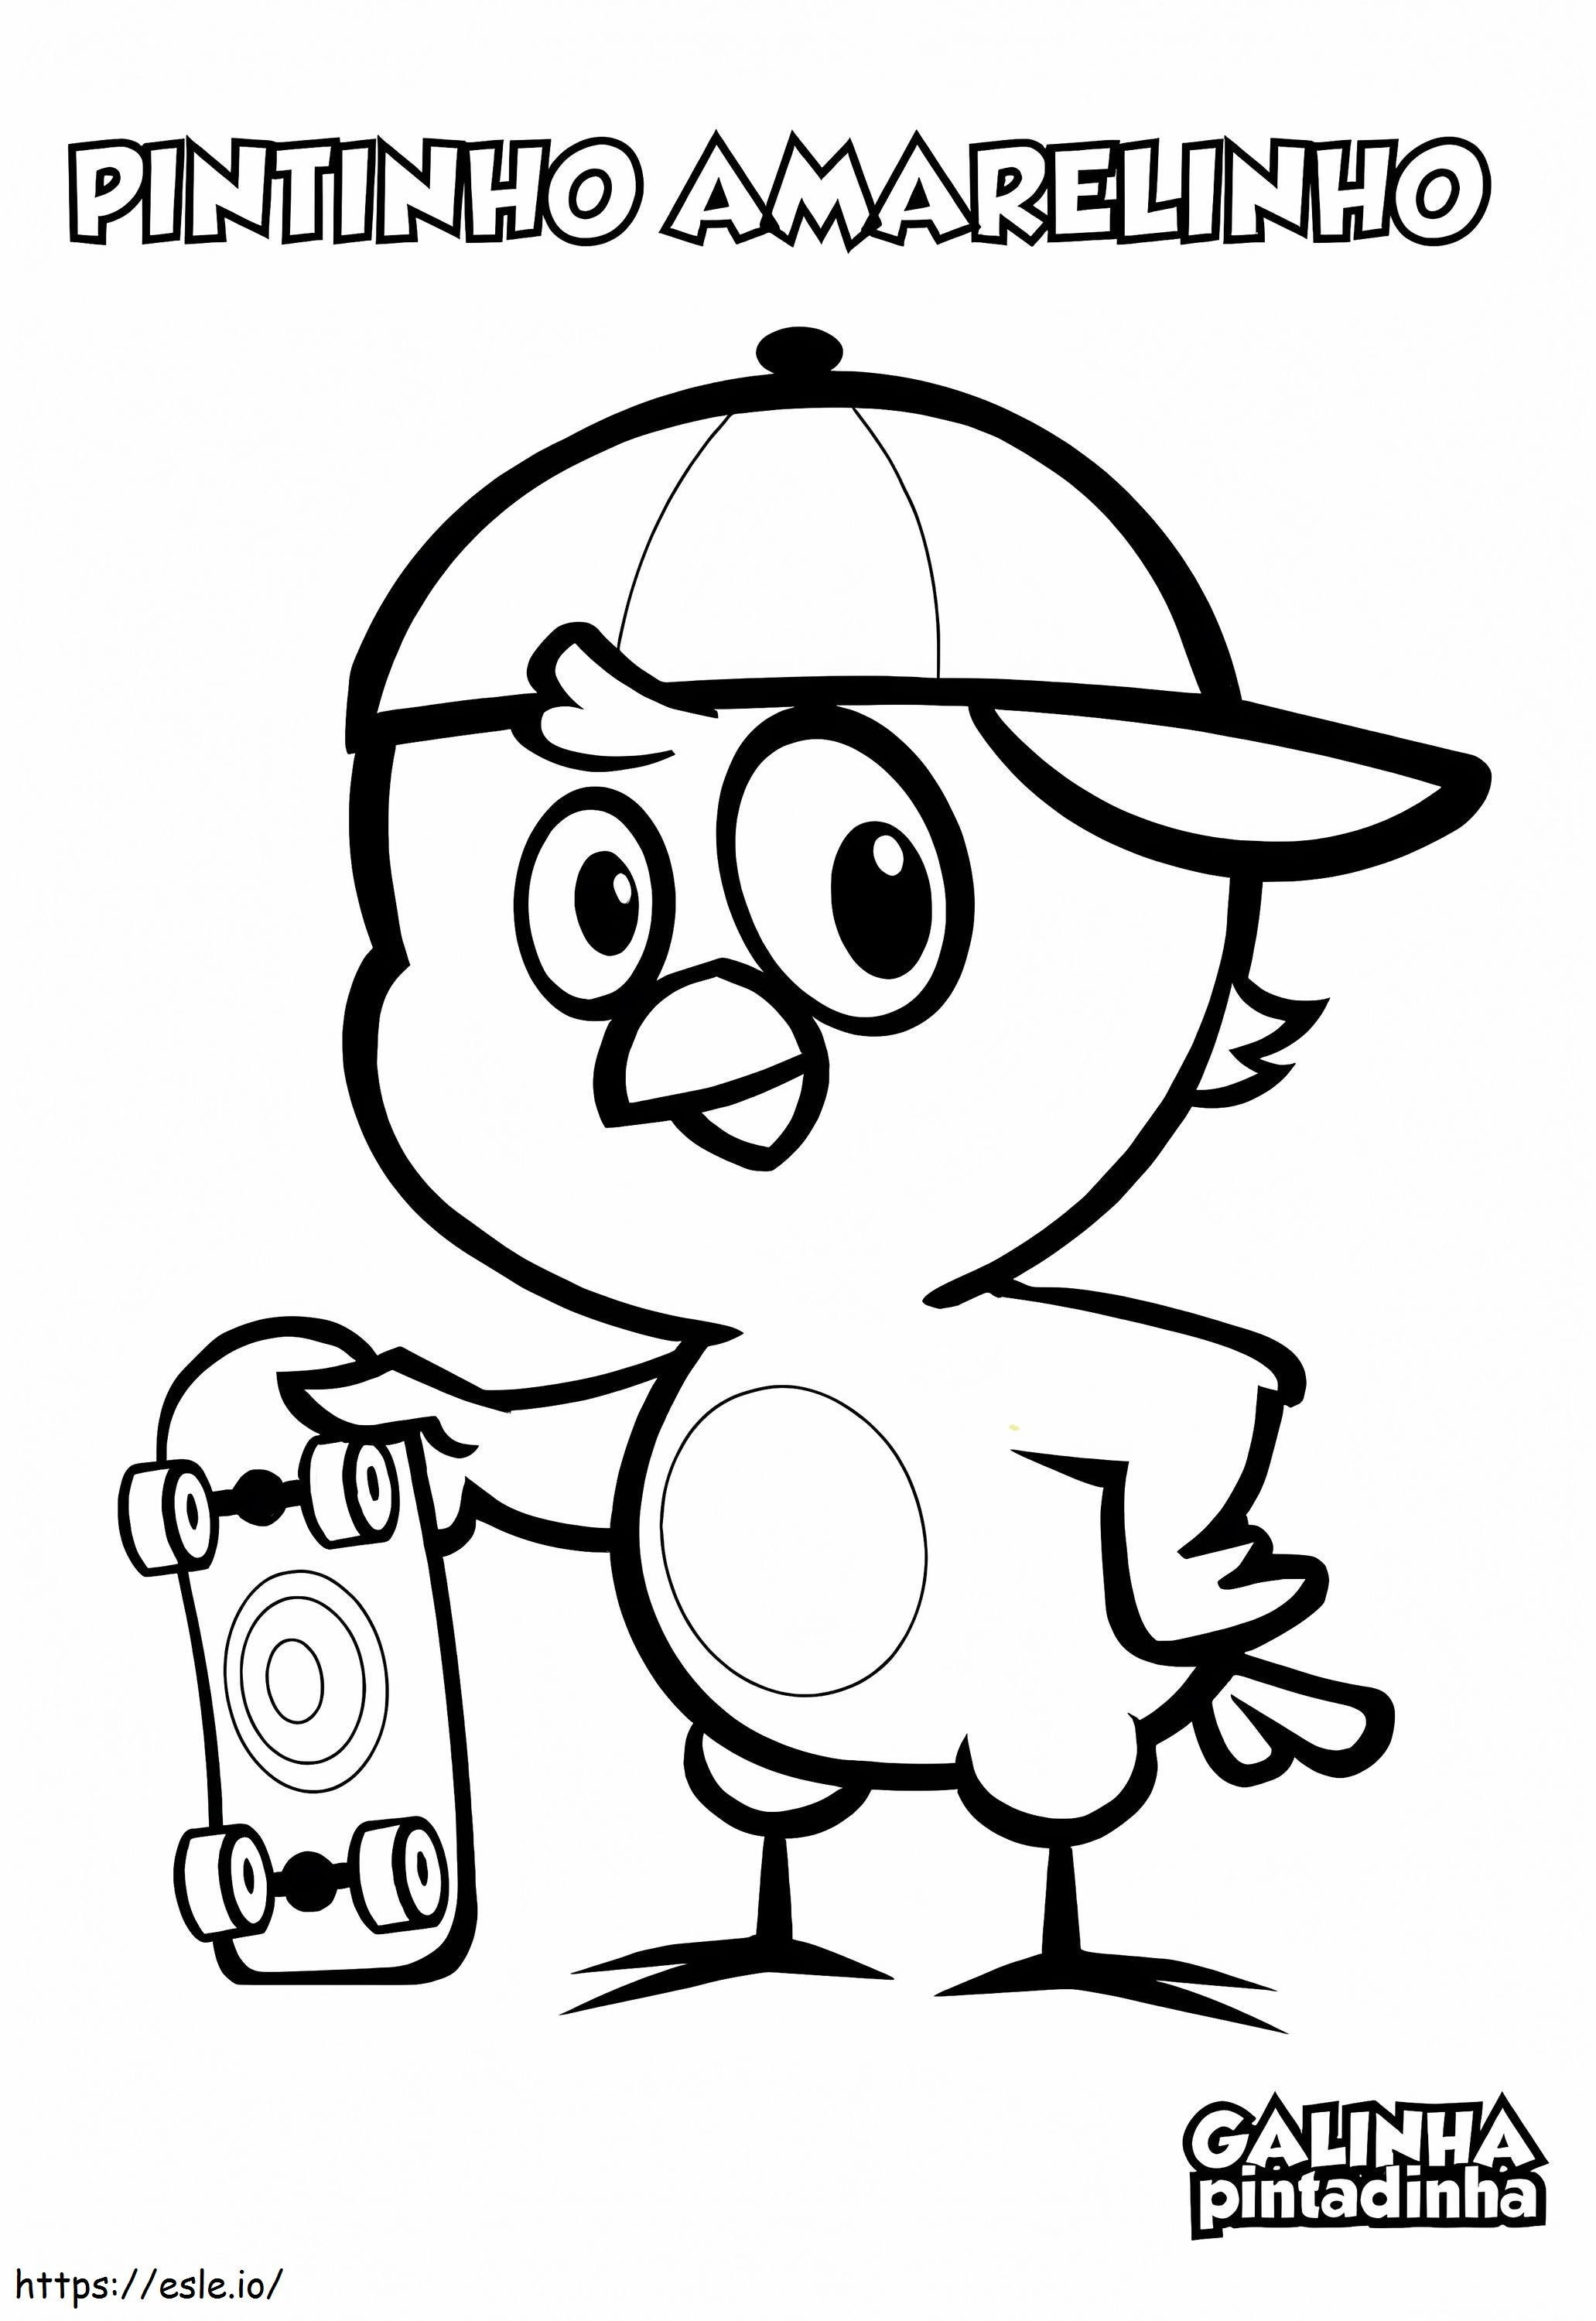 Yellow Chick coloring page